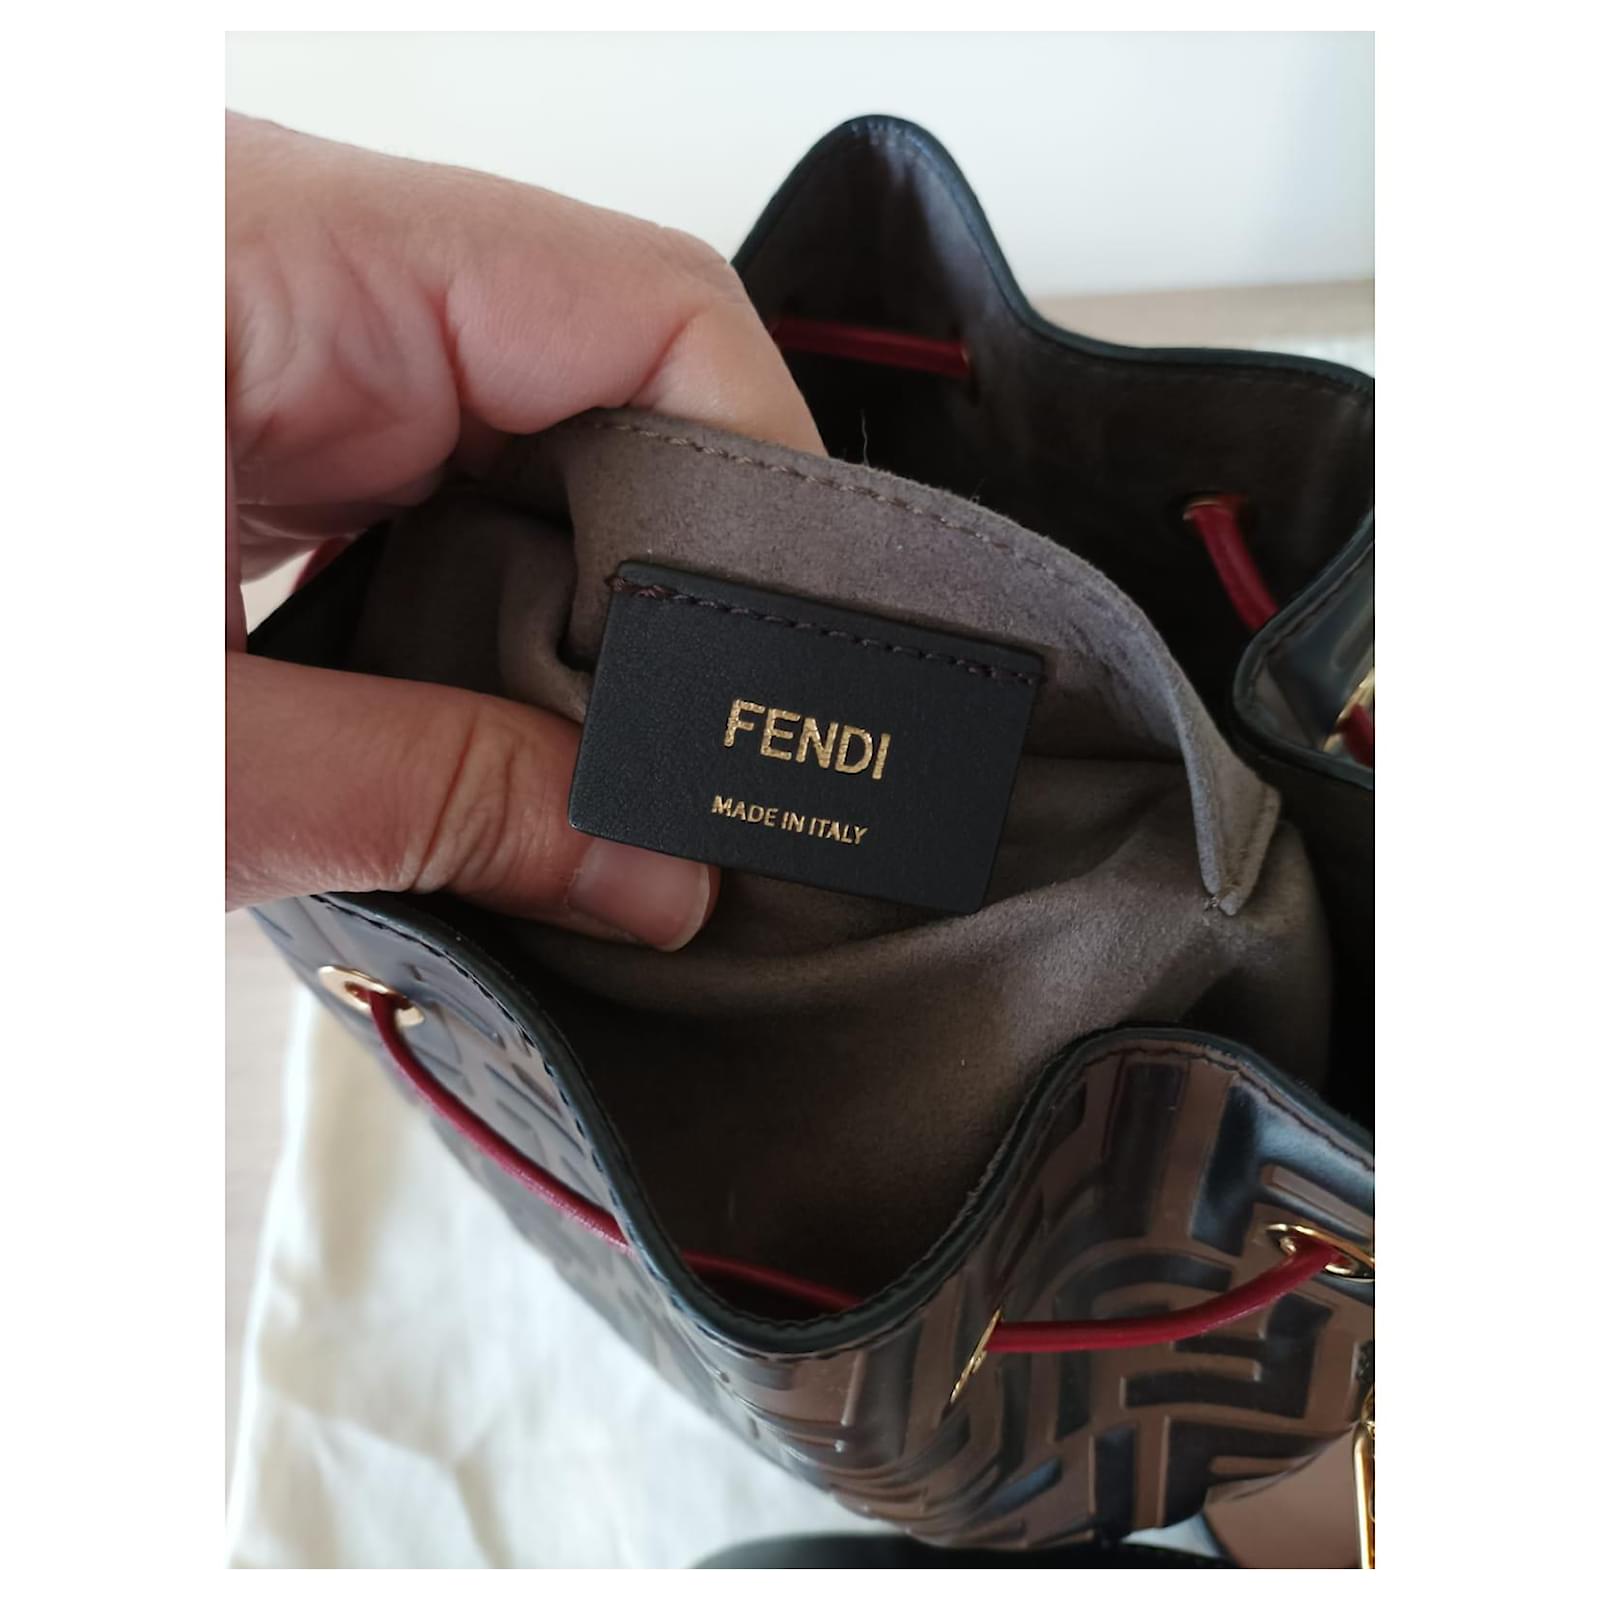 Fendi bag my treasure large model excellent condition 100% leather